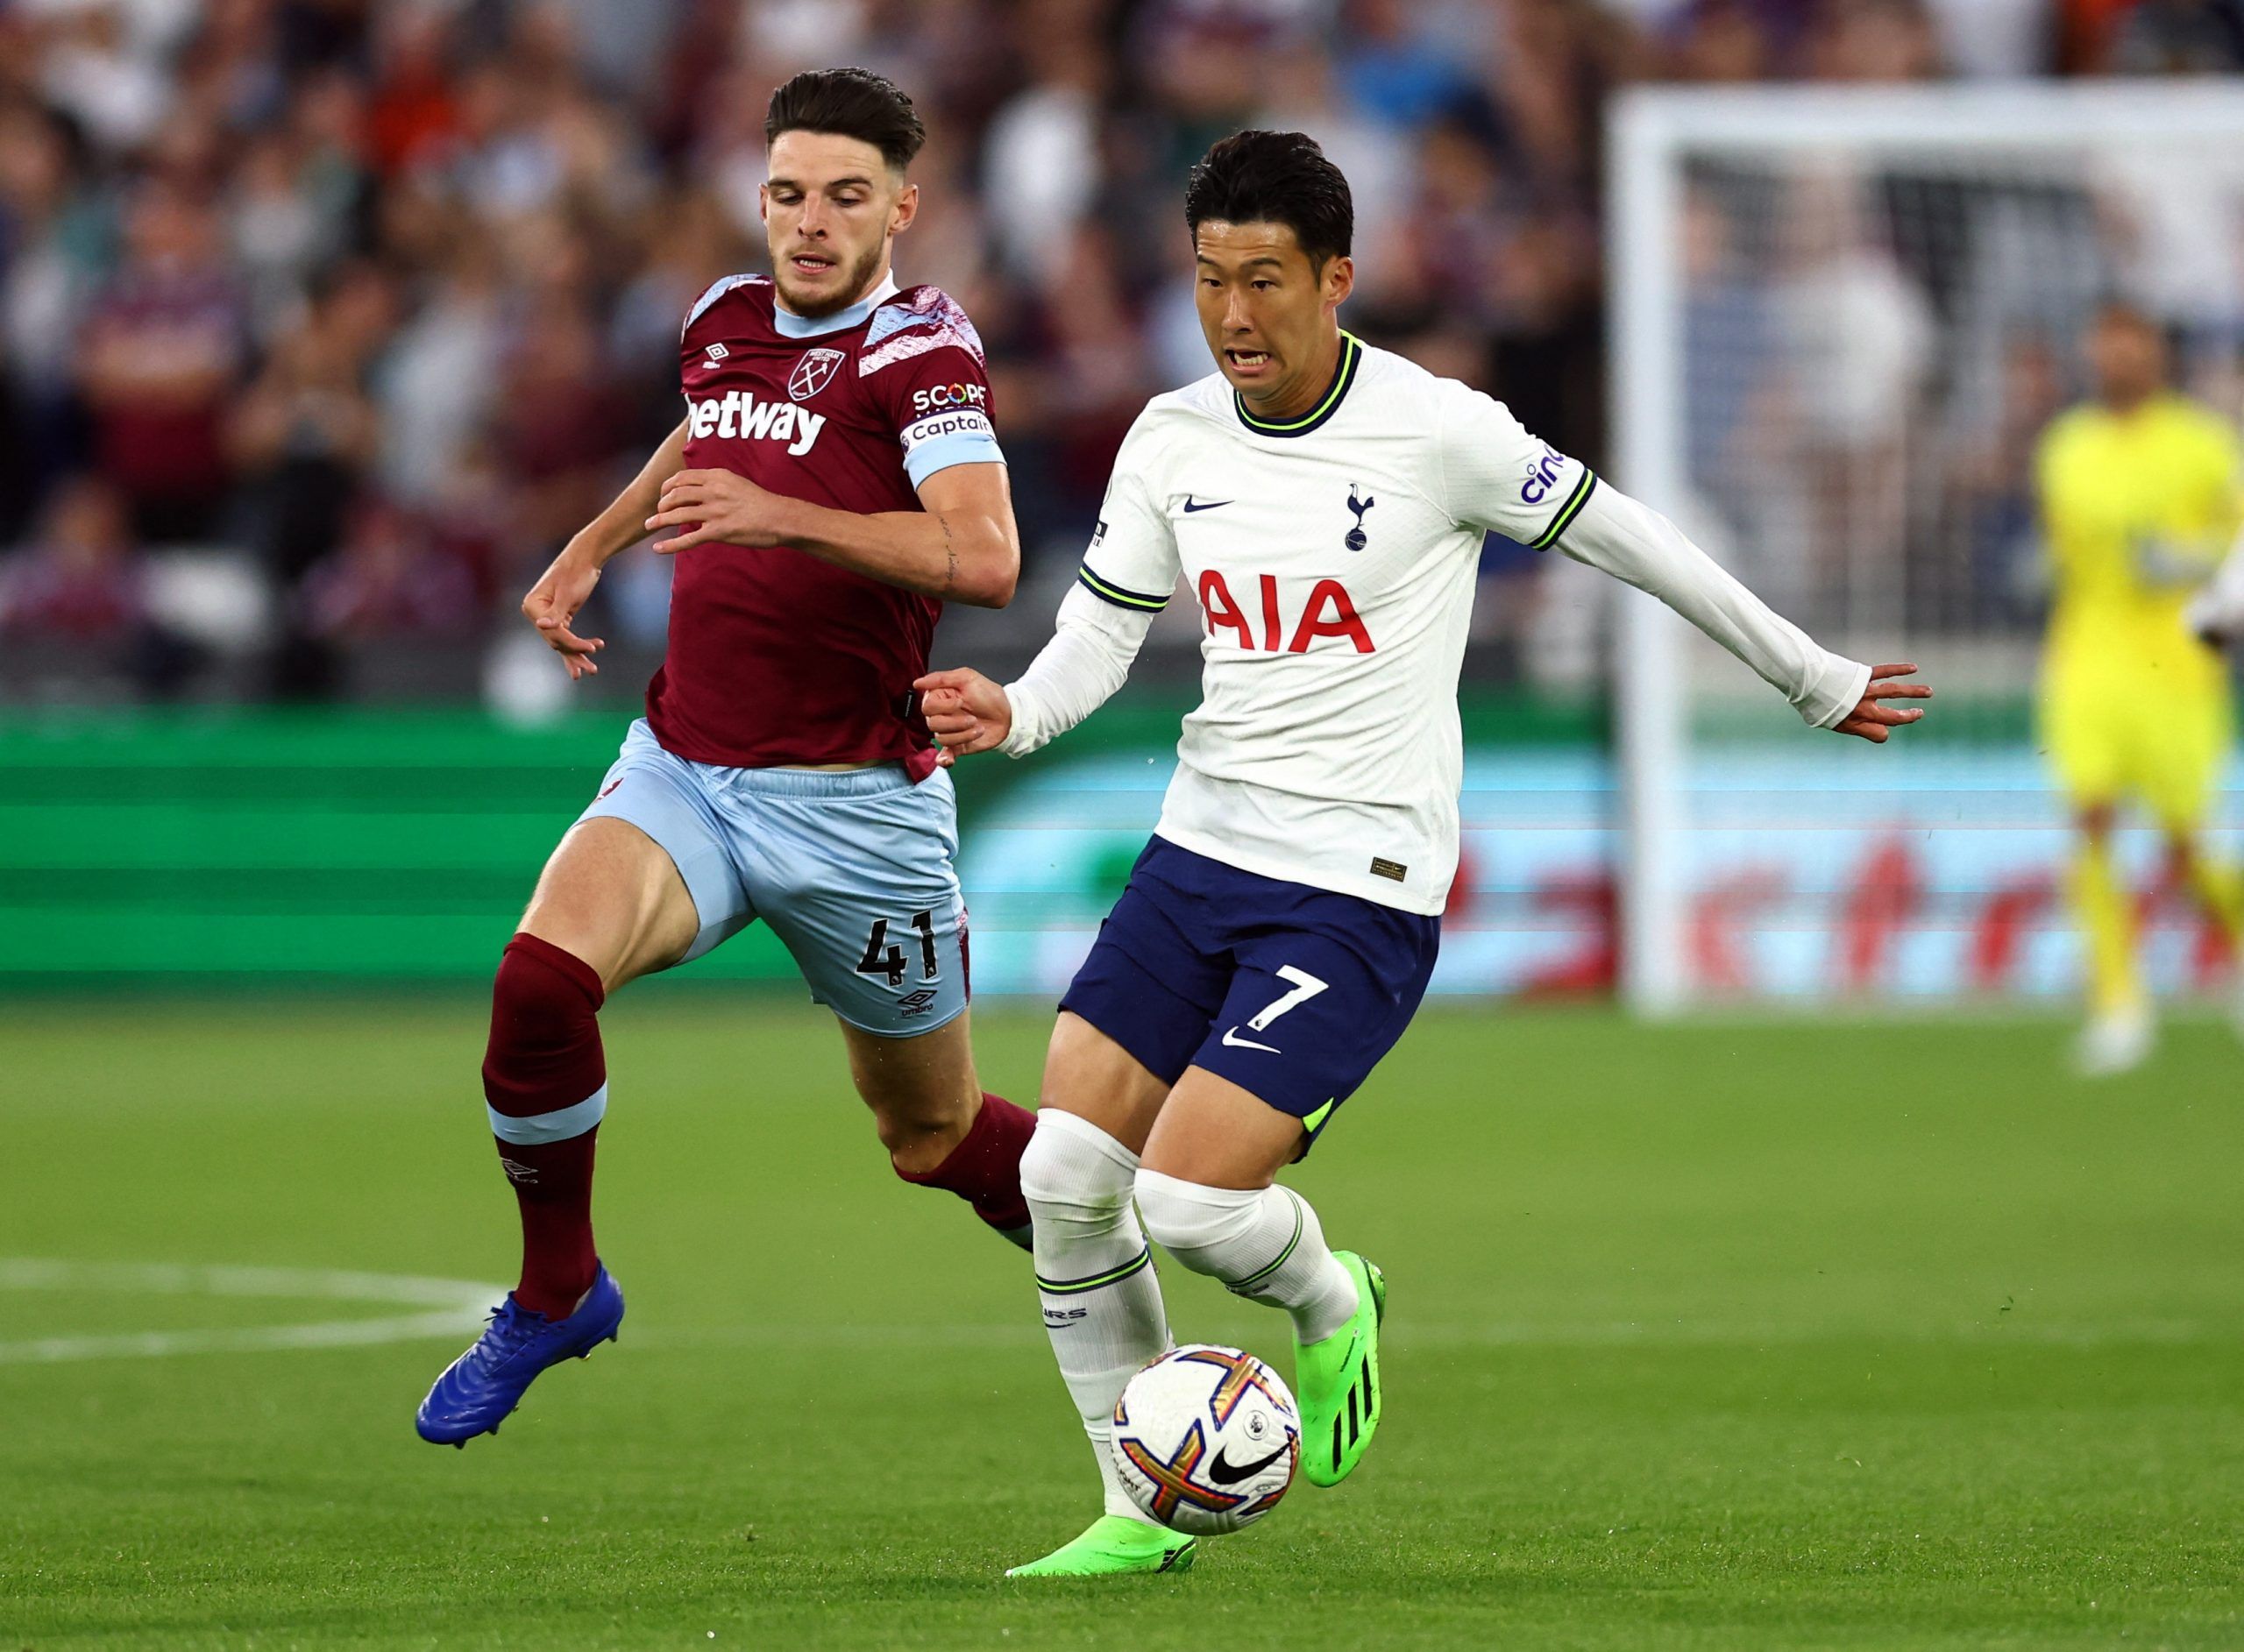 West Ham United's Declan Rice in action with Tottenham Hotspur's Son Heung-min